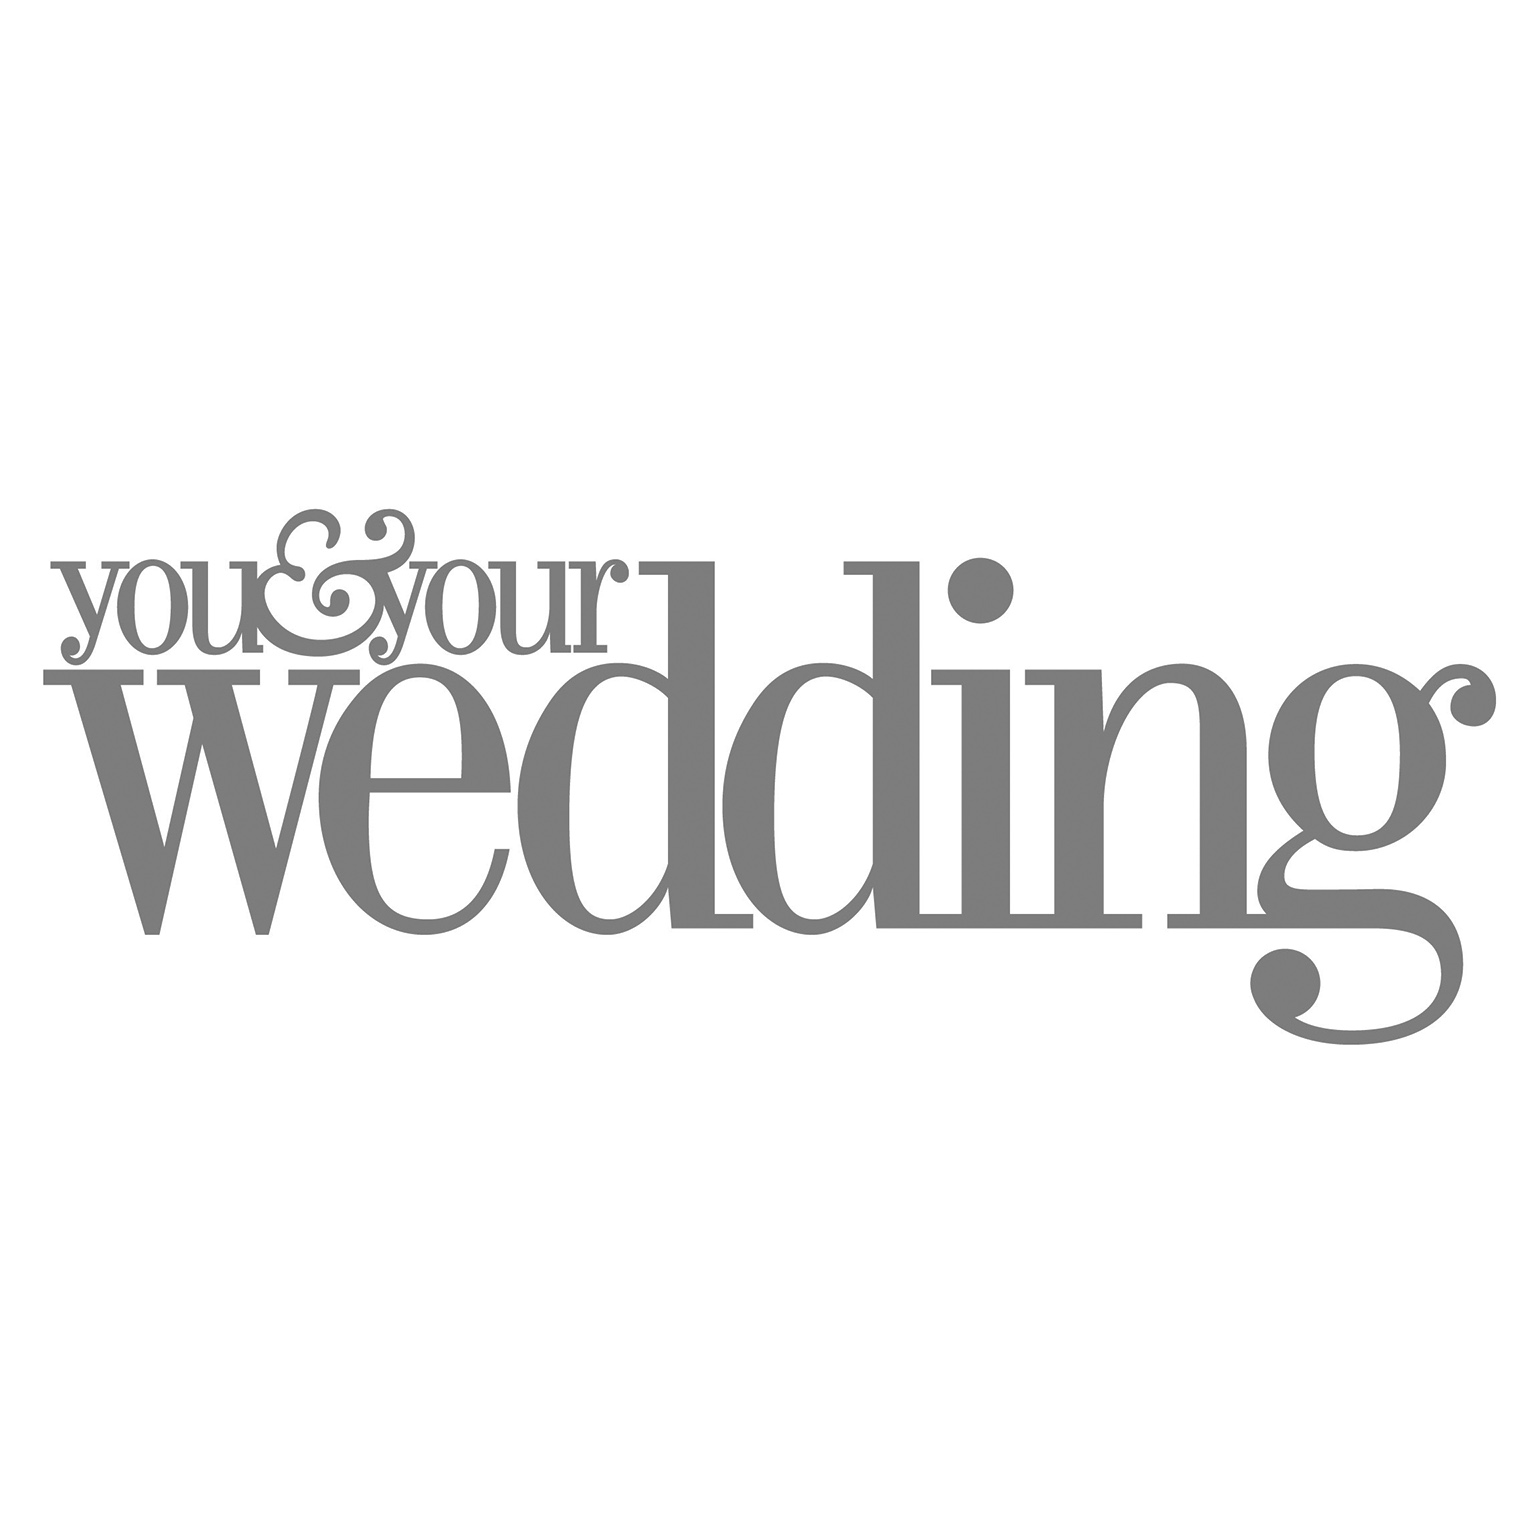 You and your Wedding Logo bw.jpg